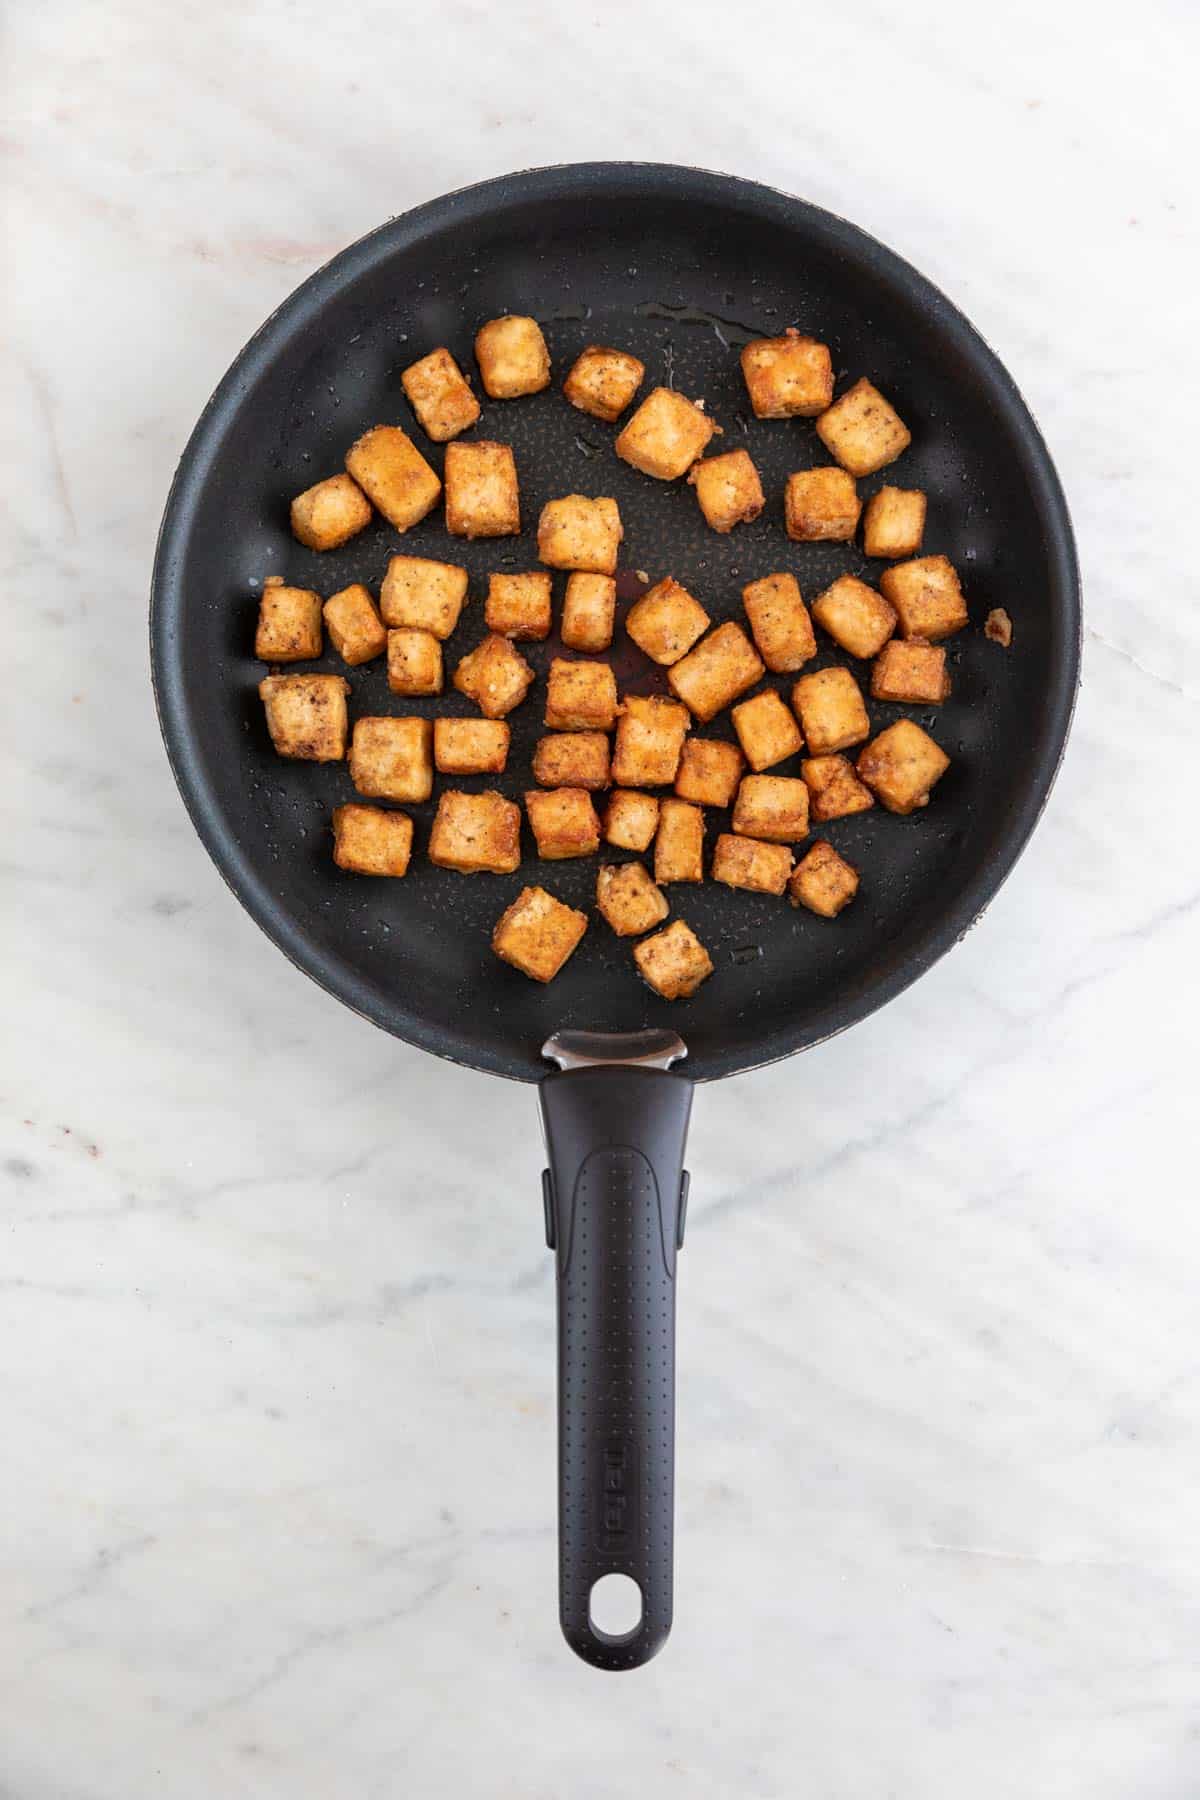 Fried tofu cubes on a non-stick frying pan.